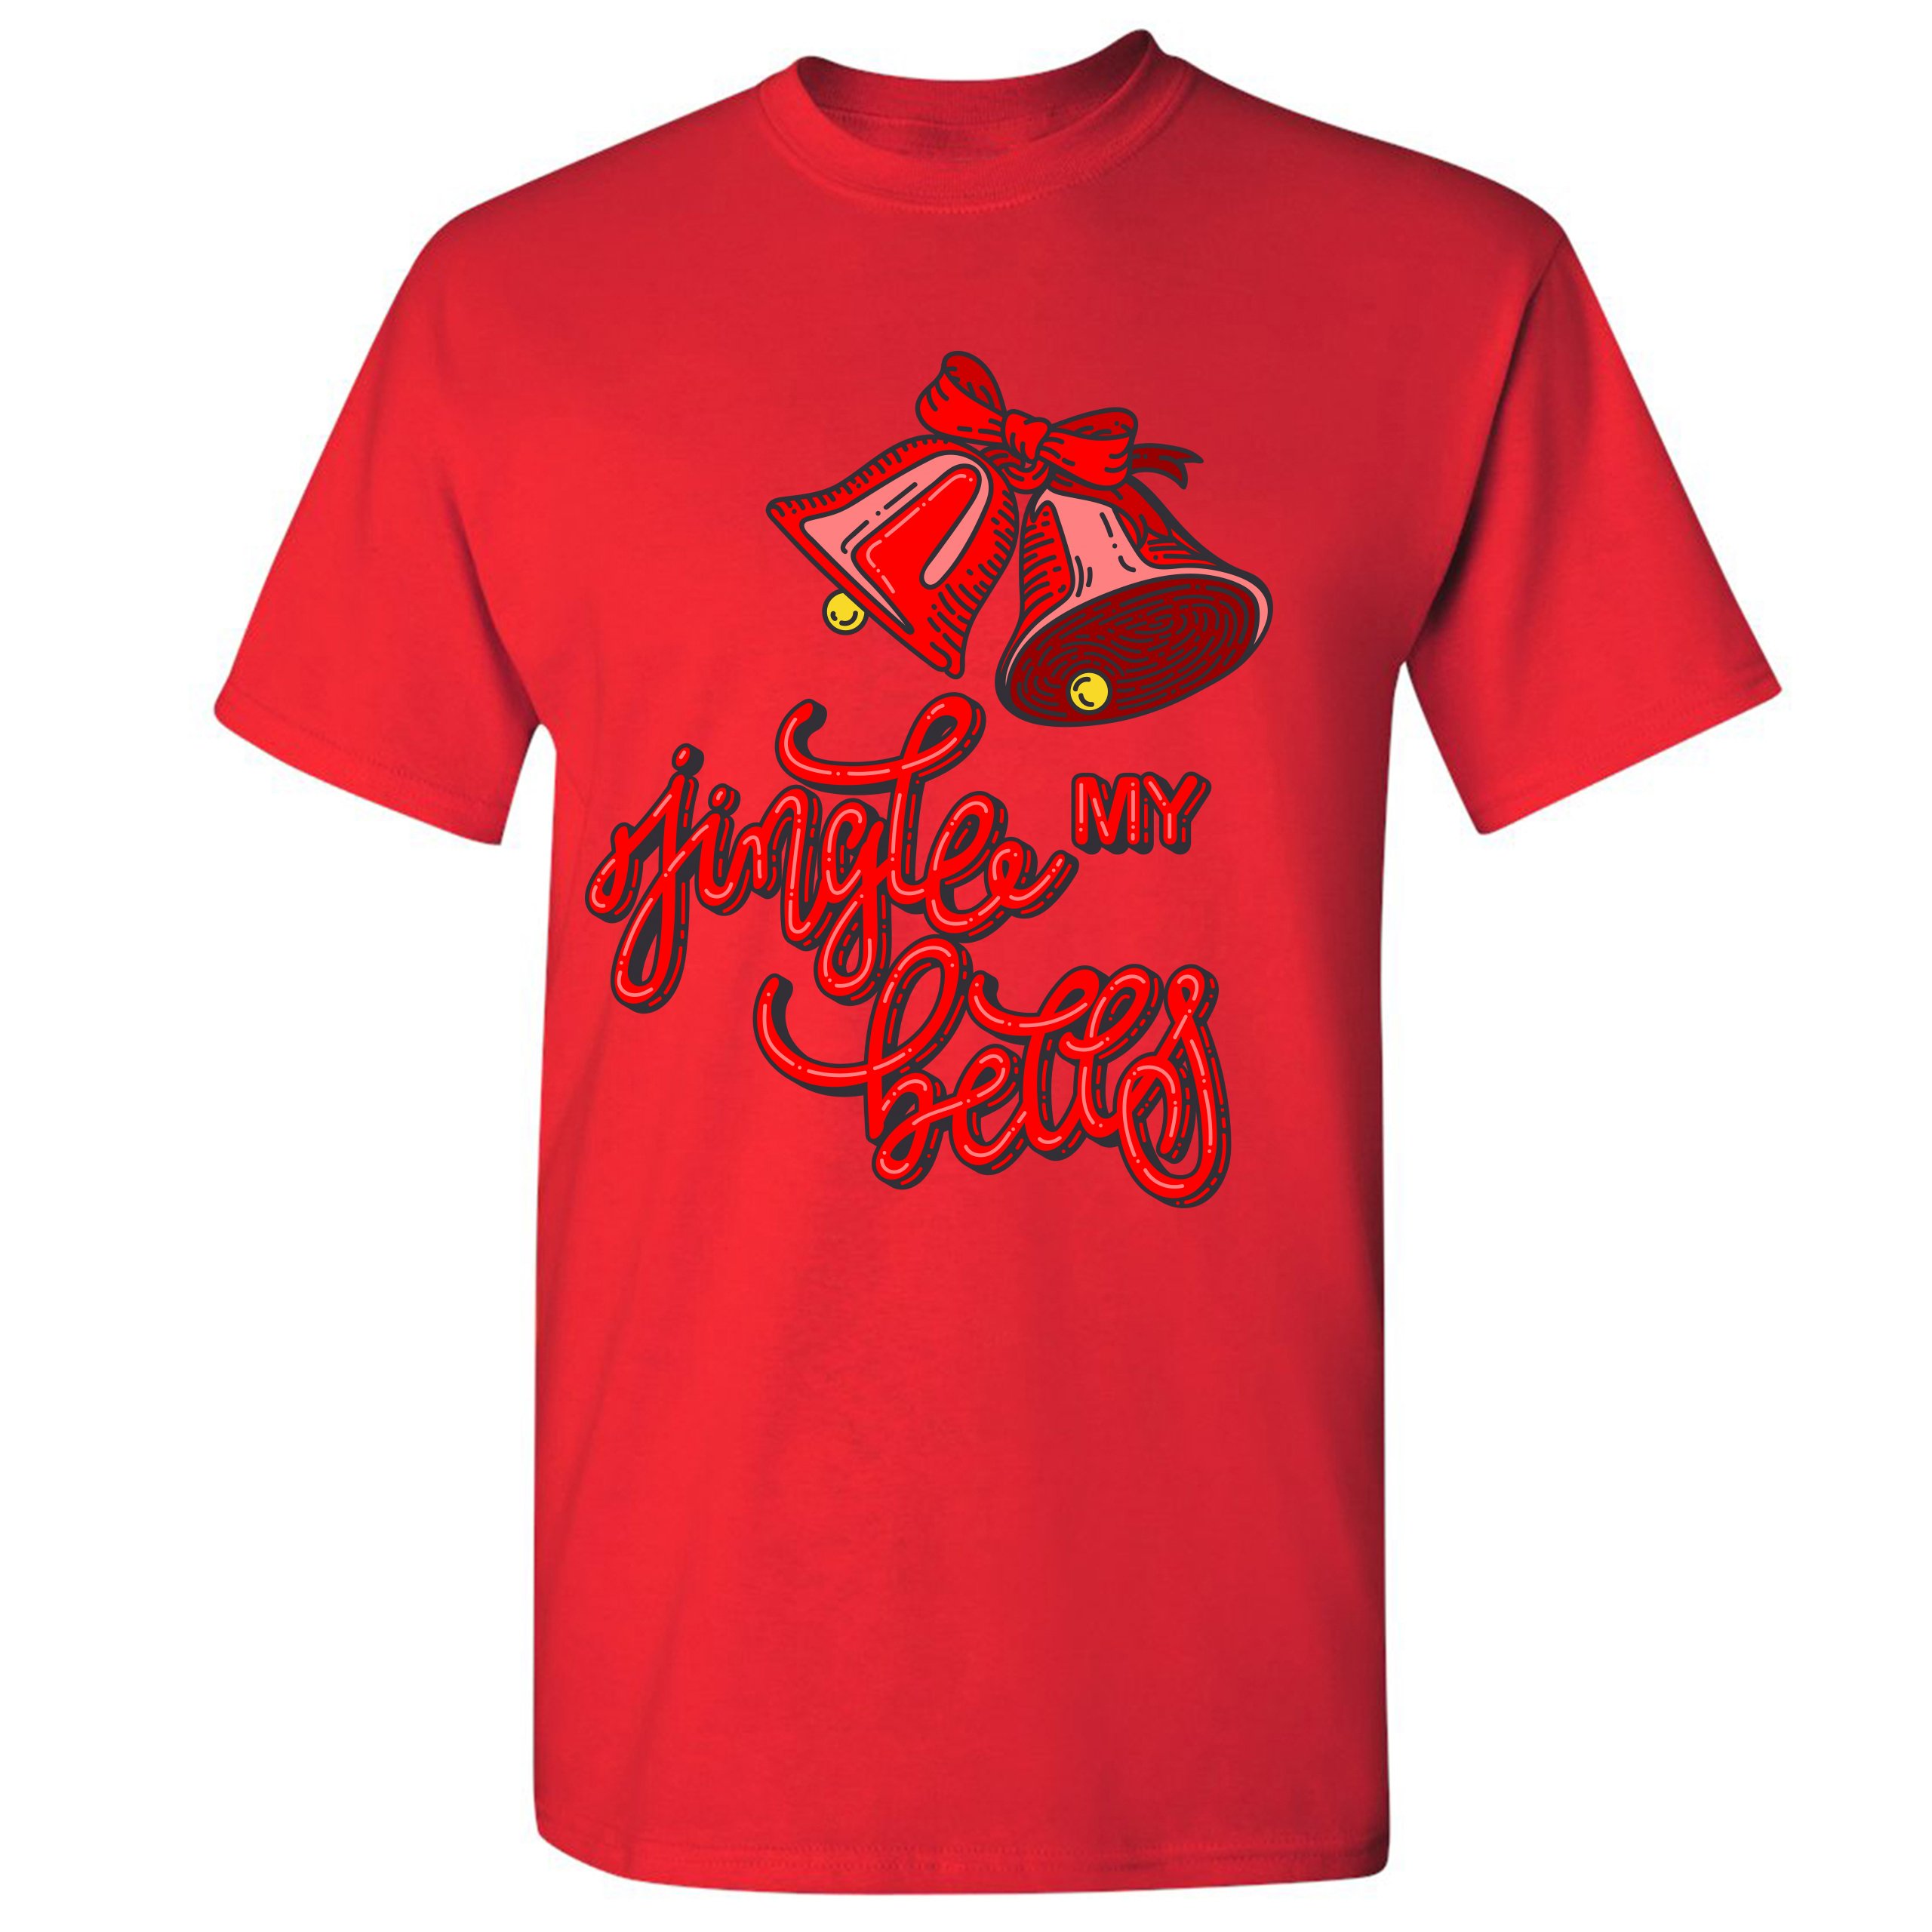 Jingle My Bells T-shirt Funny Naughty Inappropriate Christmas Men's Tee ...